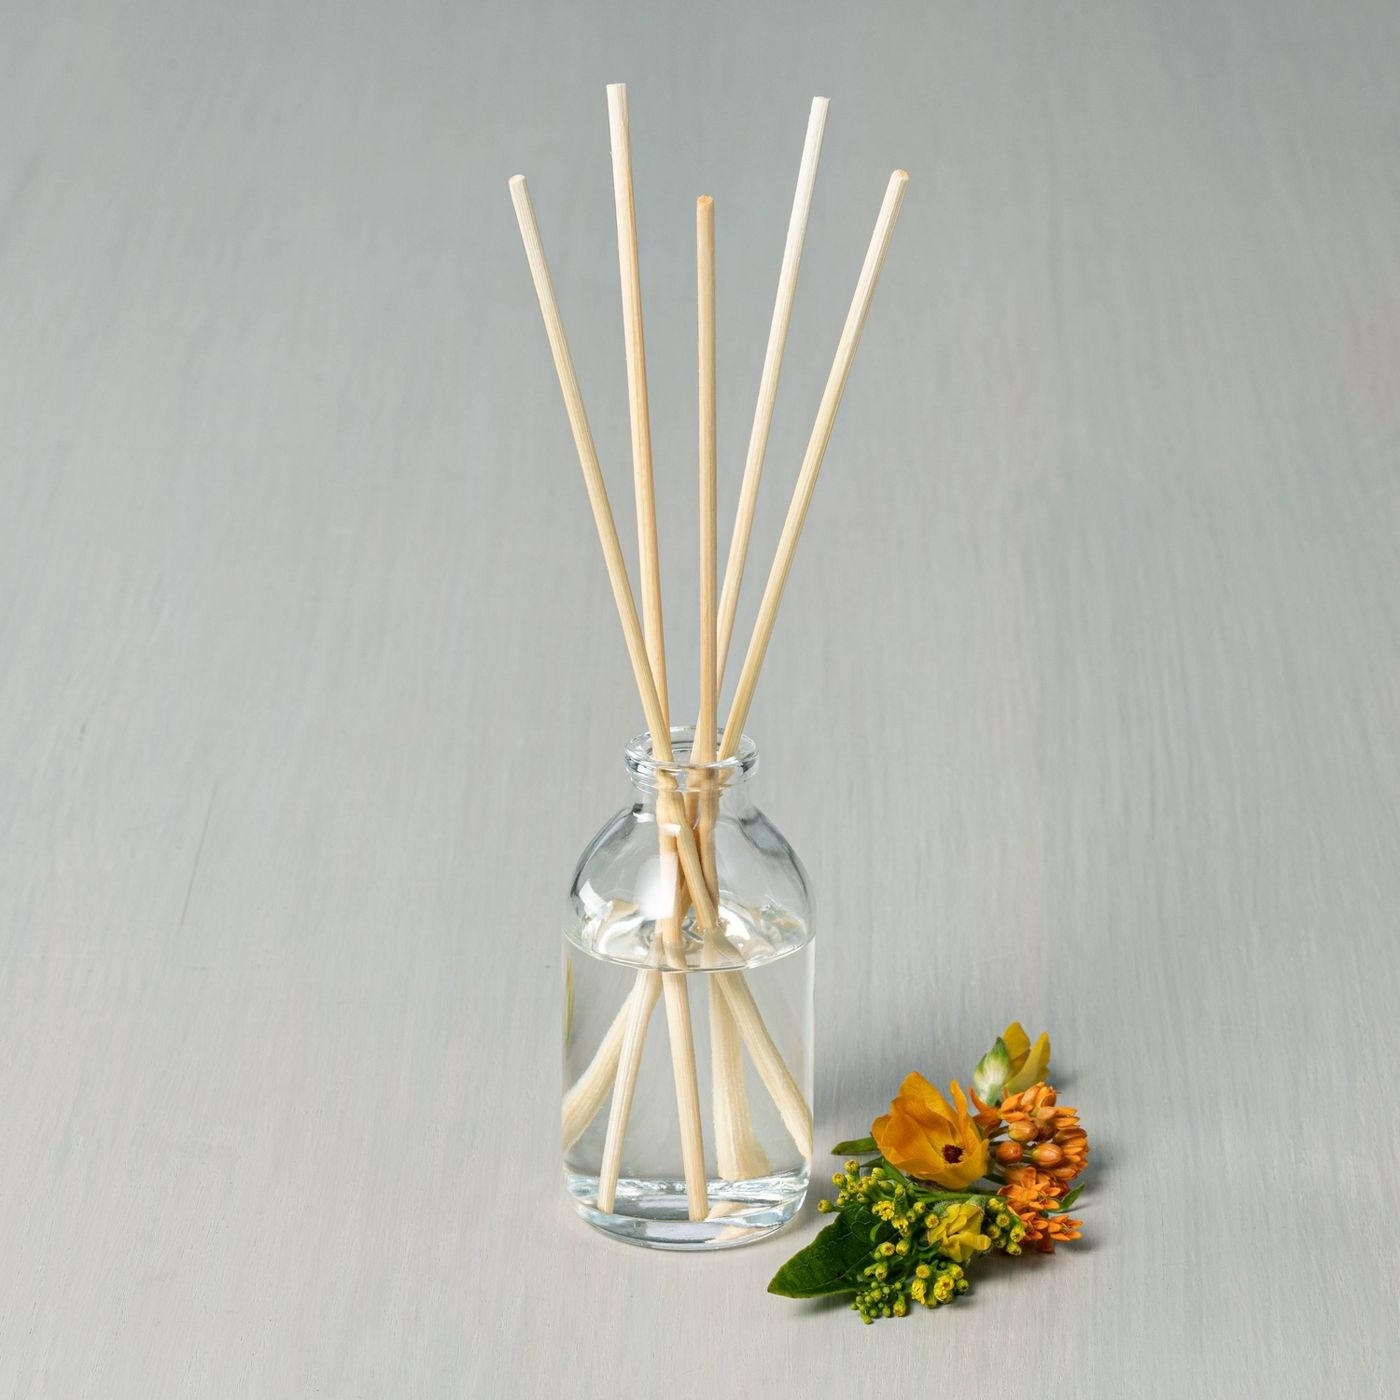 An oil diffuser next to flowers